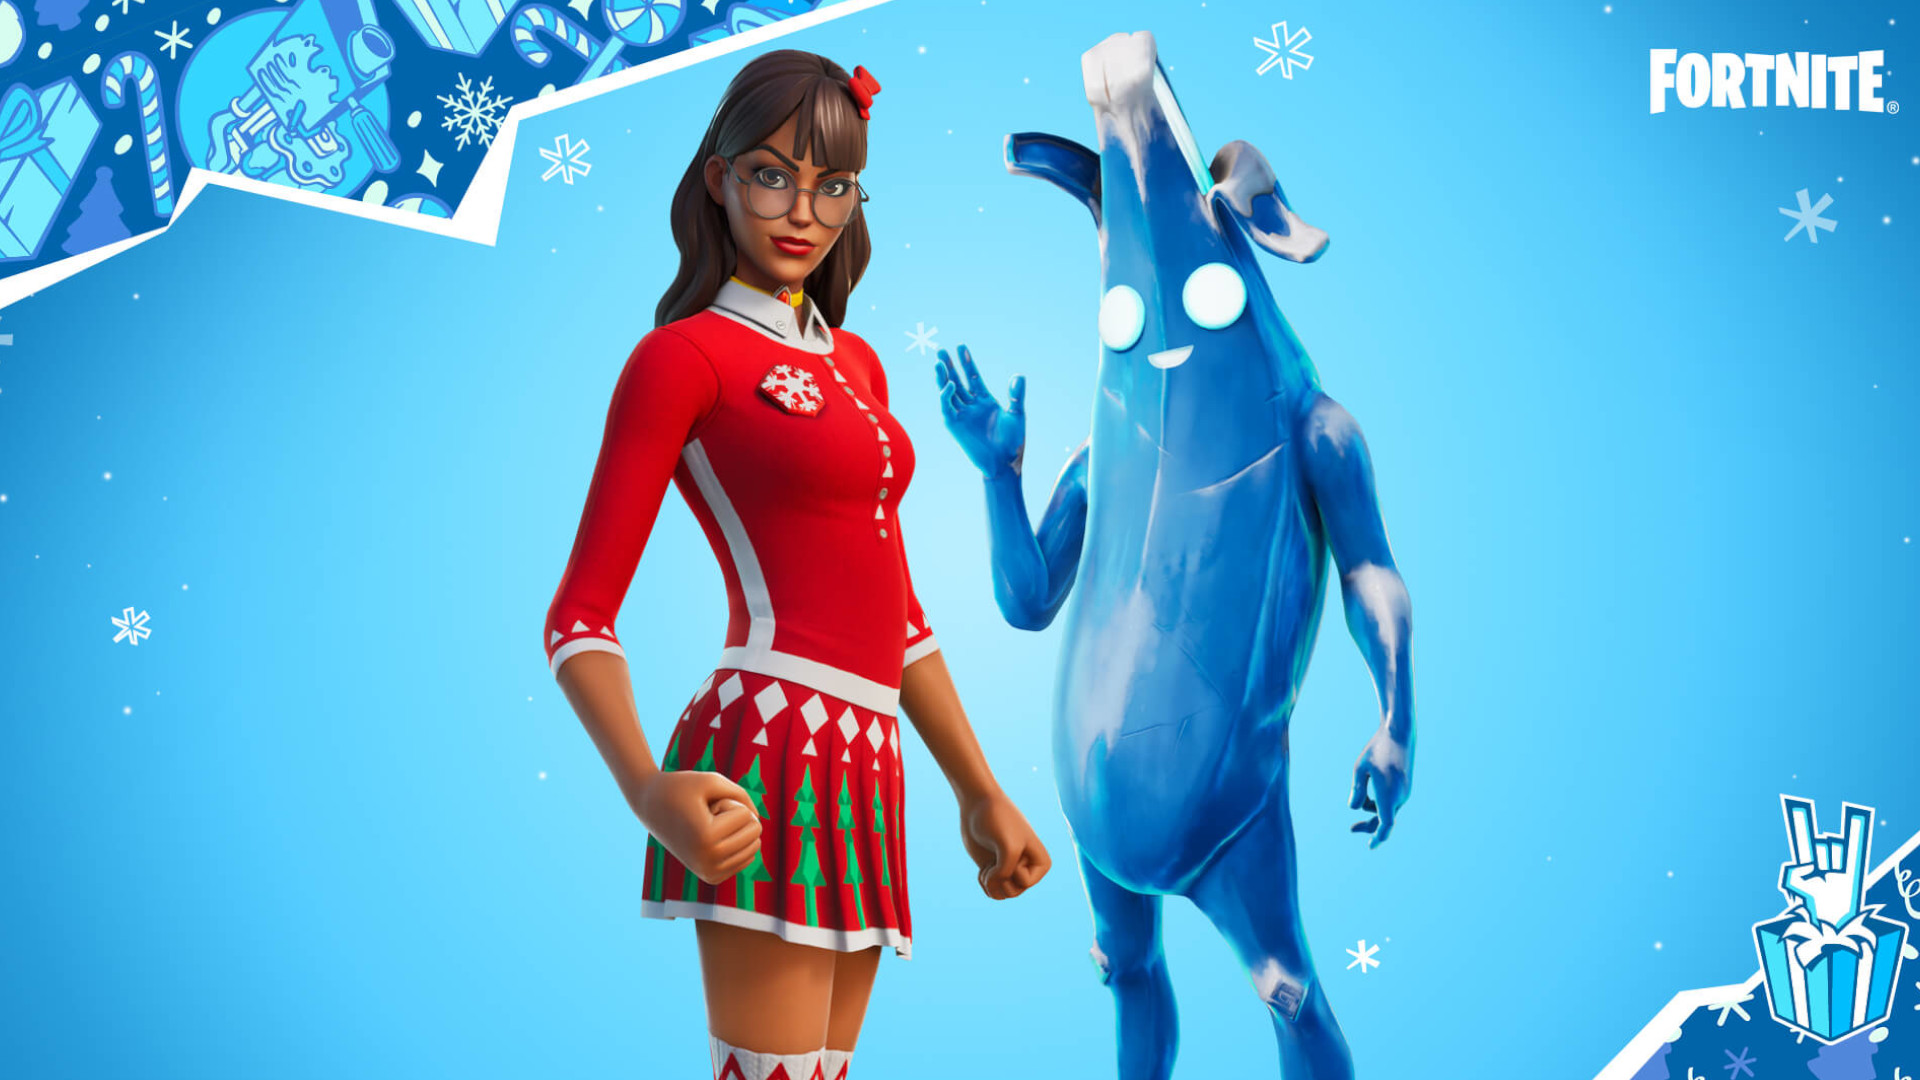 Fortnite is giving out three free skins during Winterfest